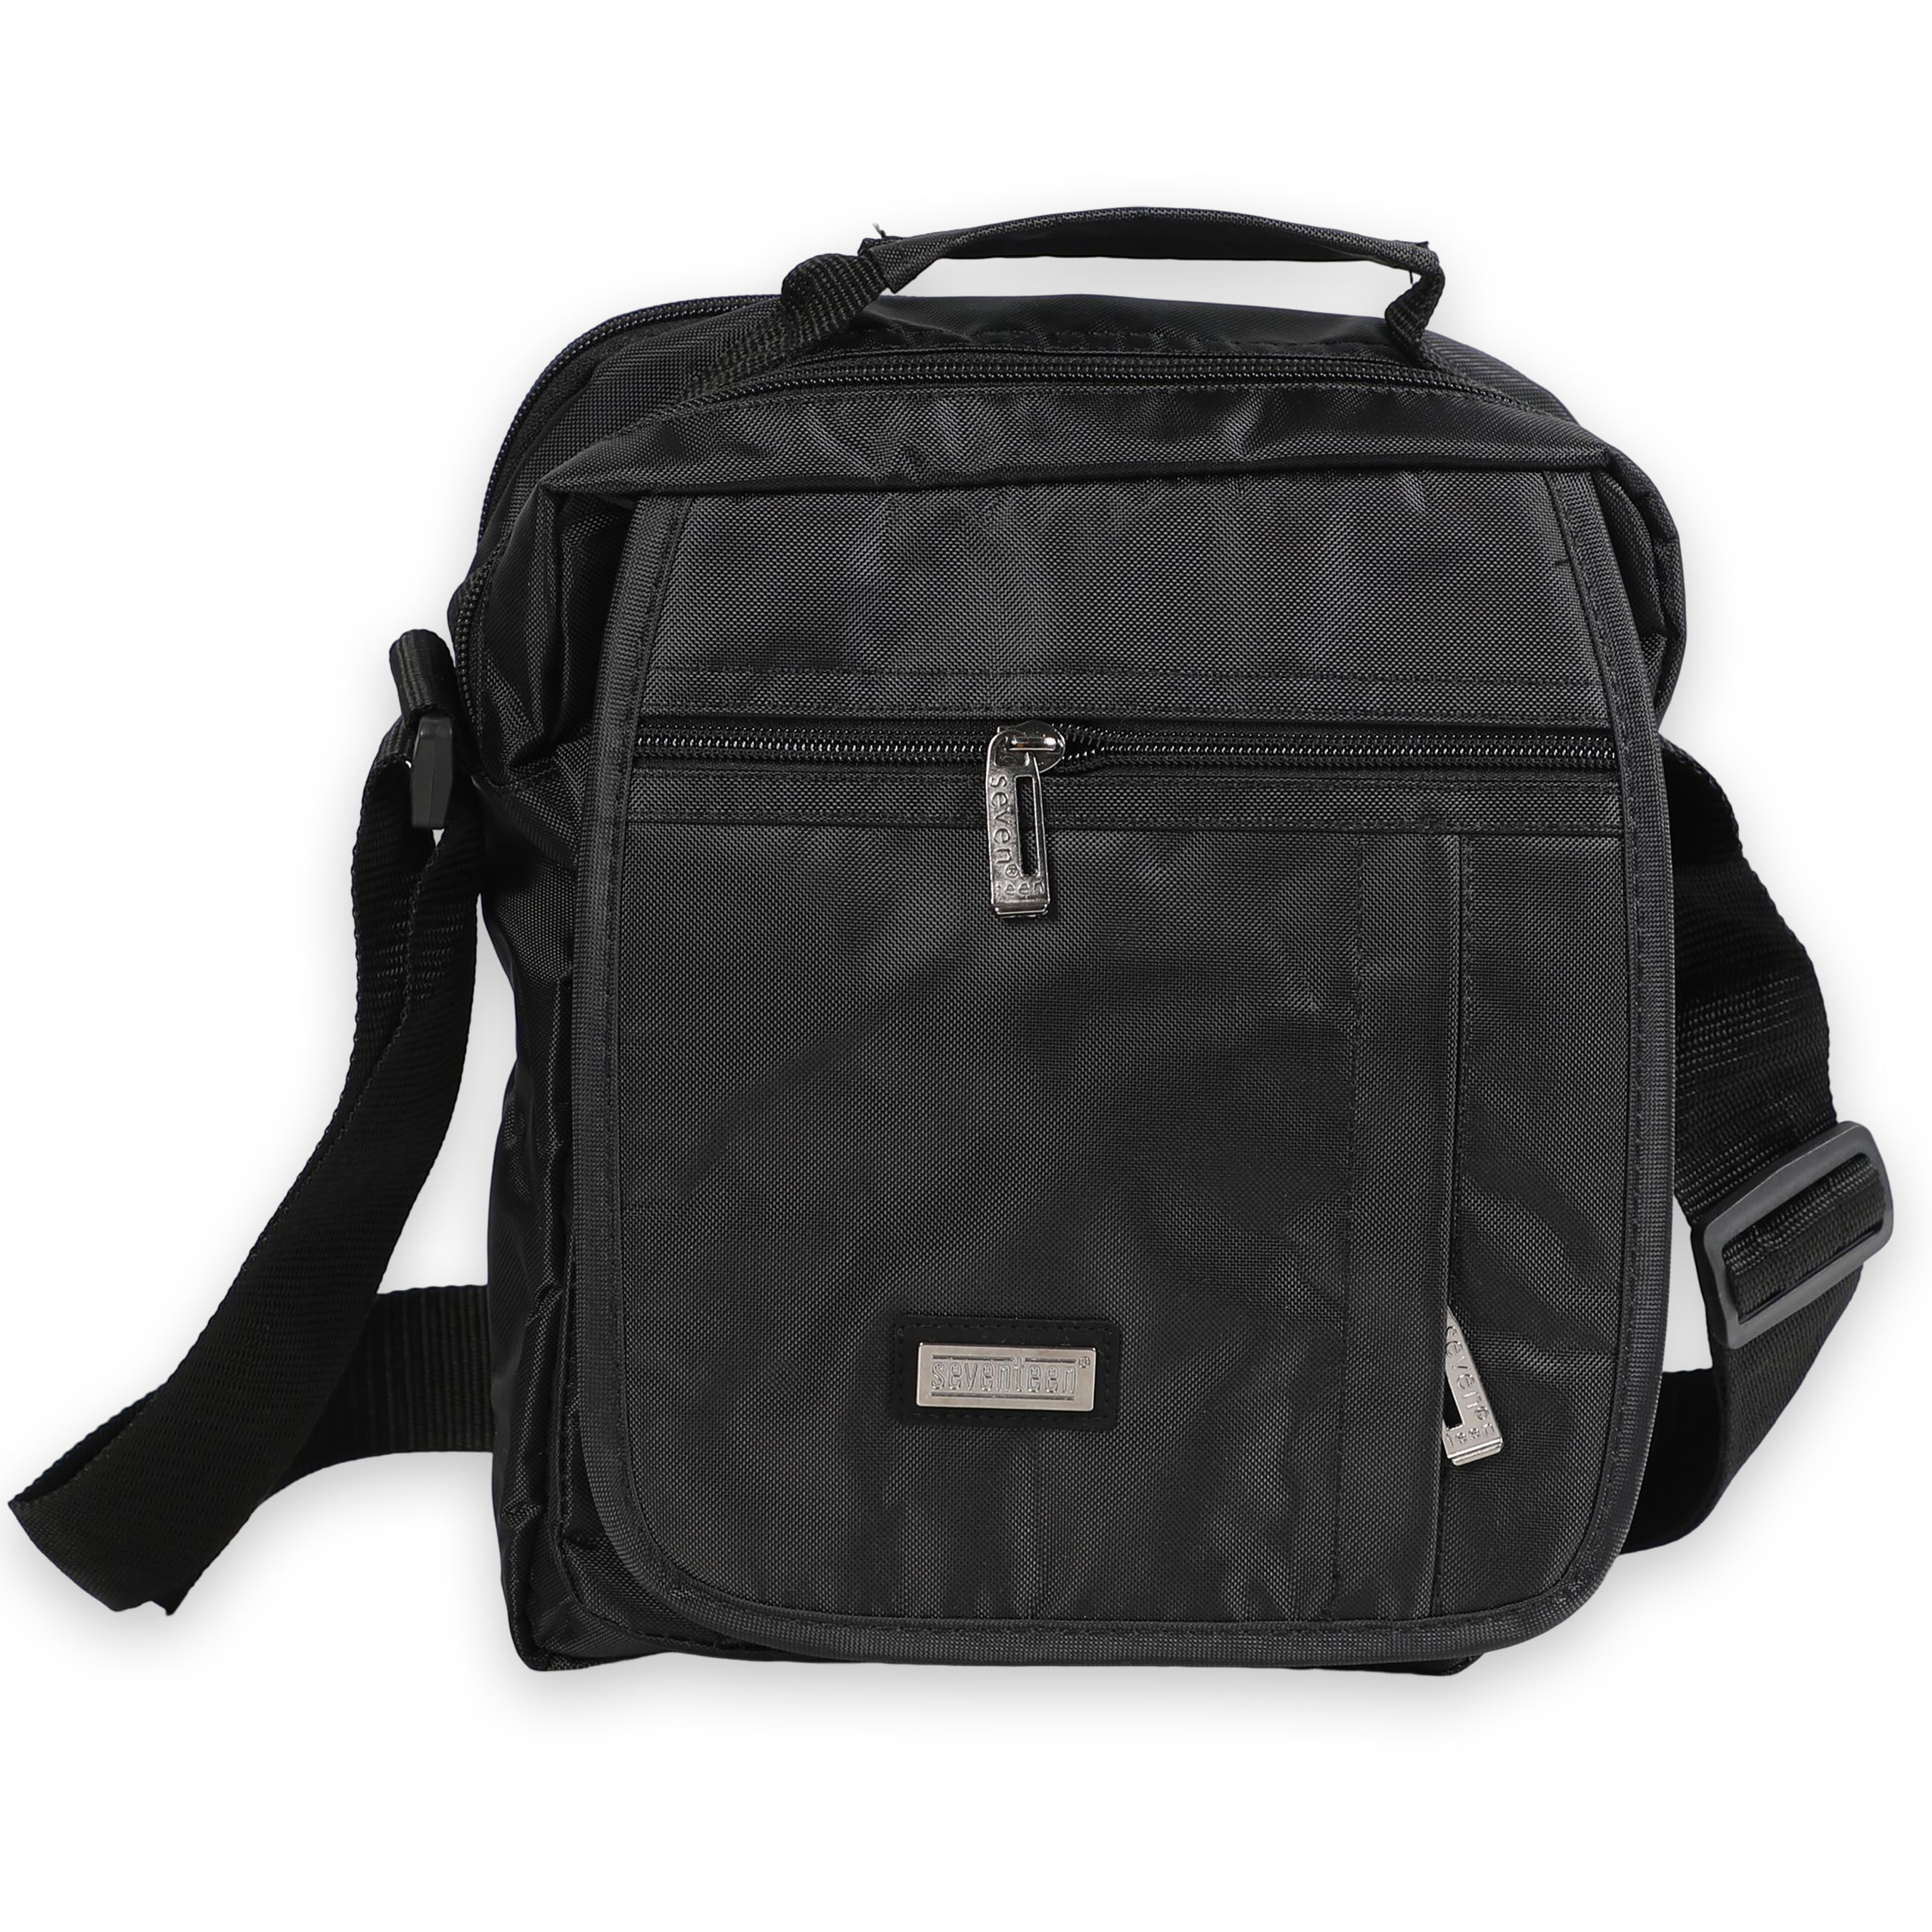 Men Black Designed Cross-Bag With Several Layers